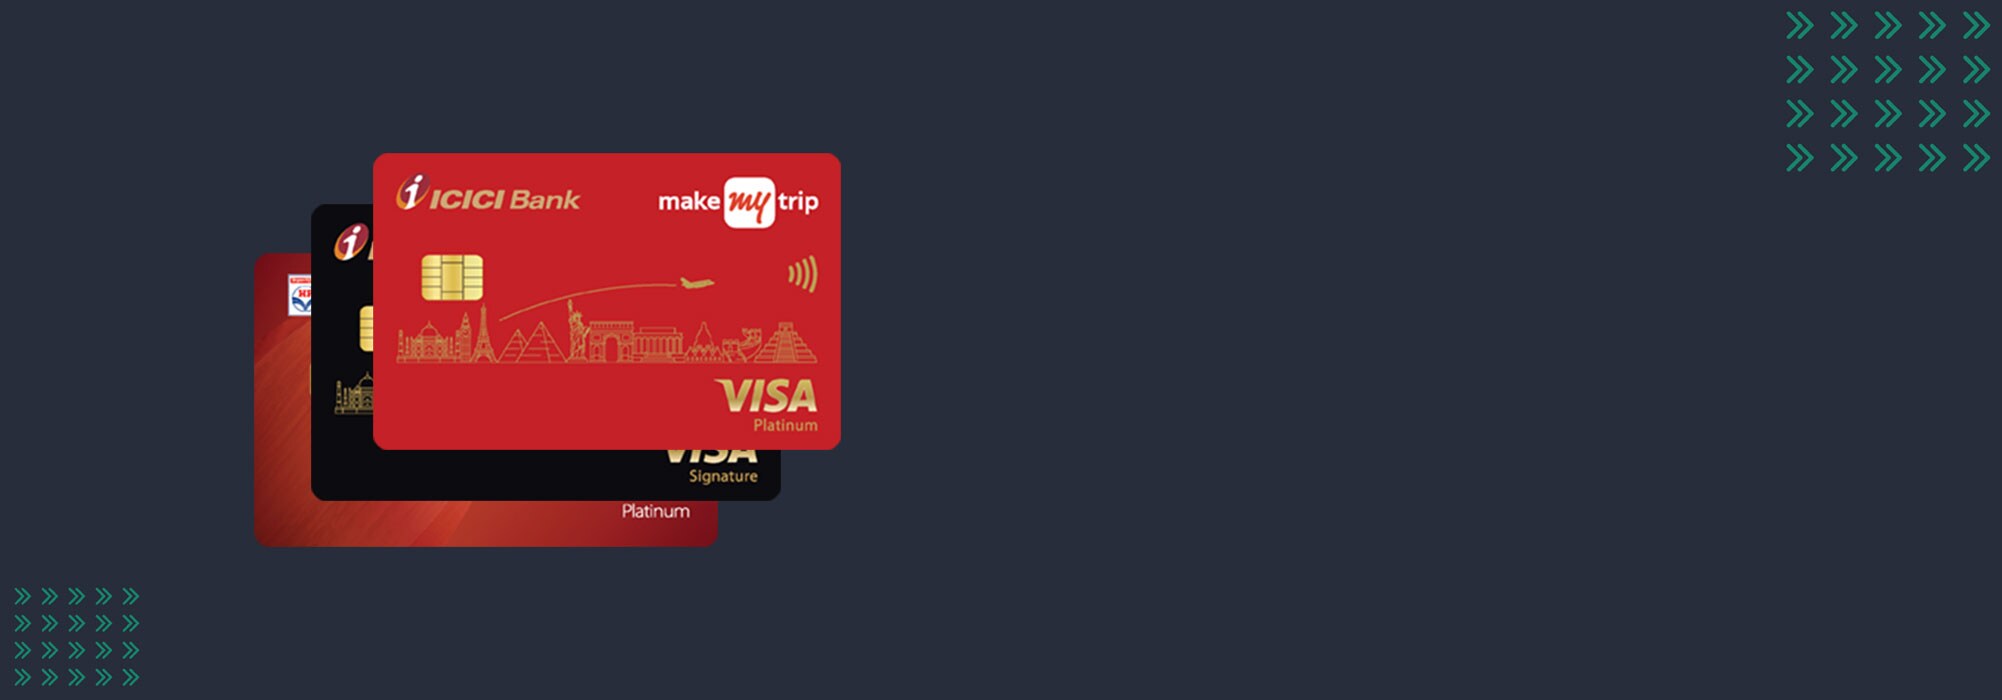 ICICI Credit Card Net Banking